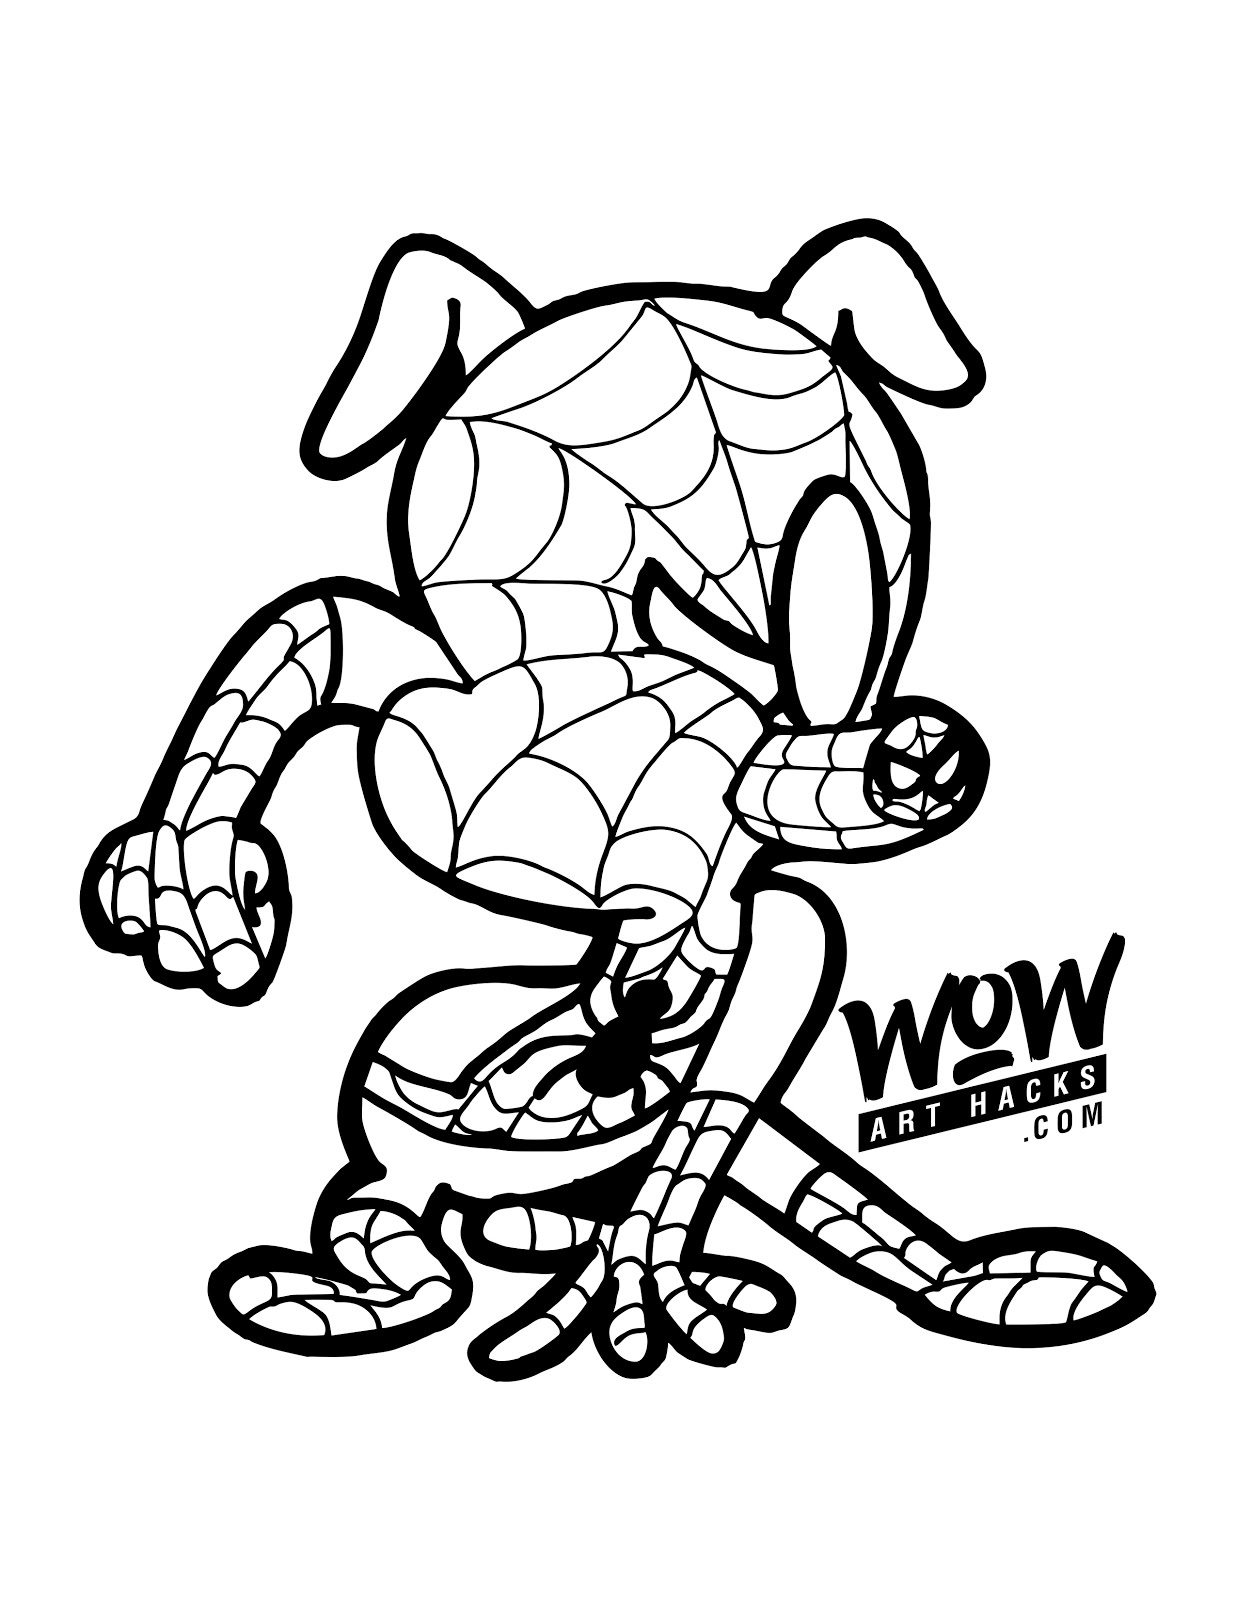 Spider Ham Coloring pages from the new spider man movie Into the ...